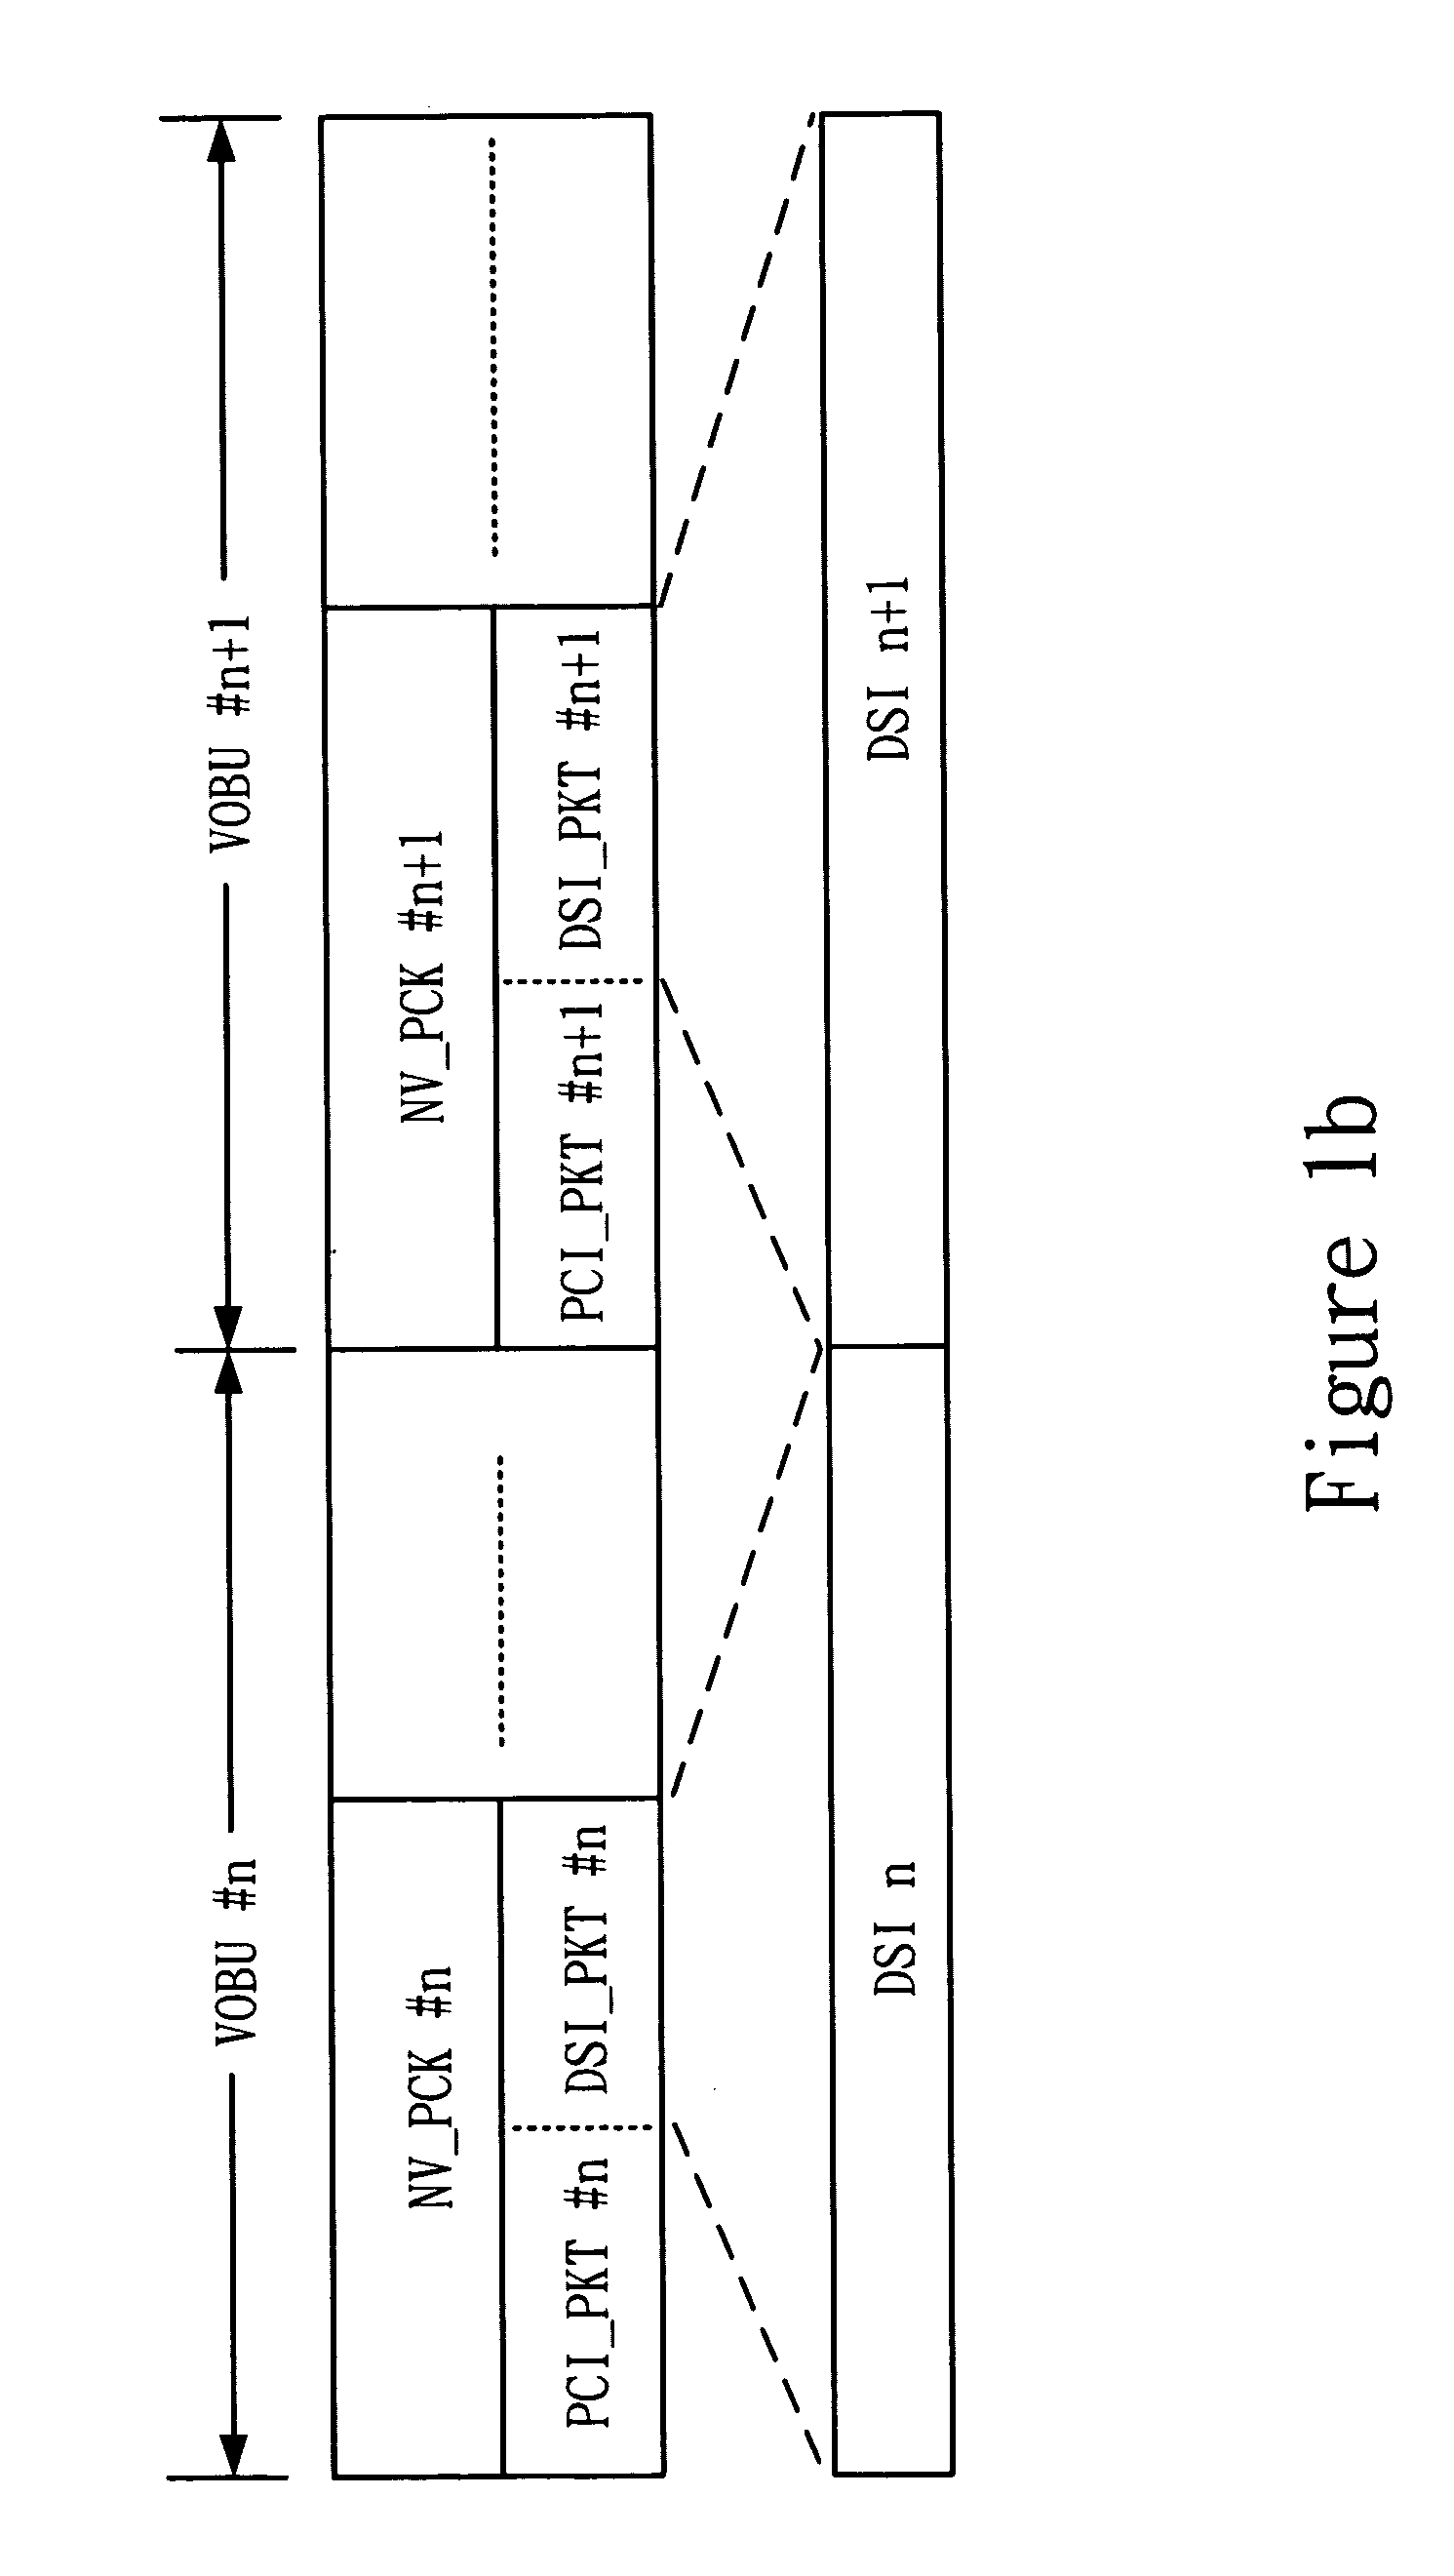 Method for controlling an operating frequency of a processor during playback of a recorded video